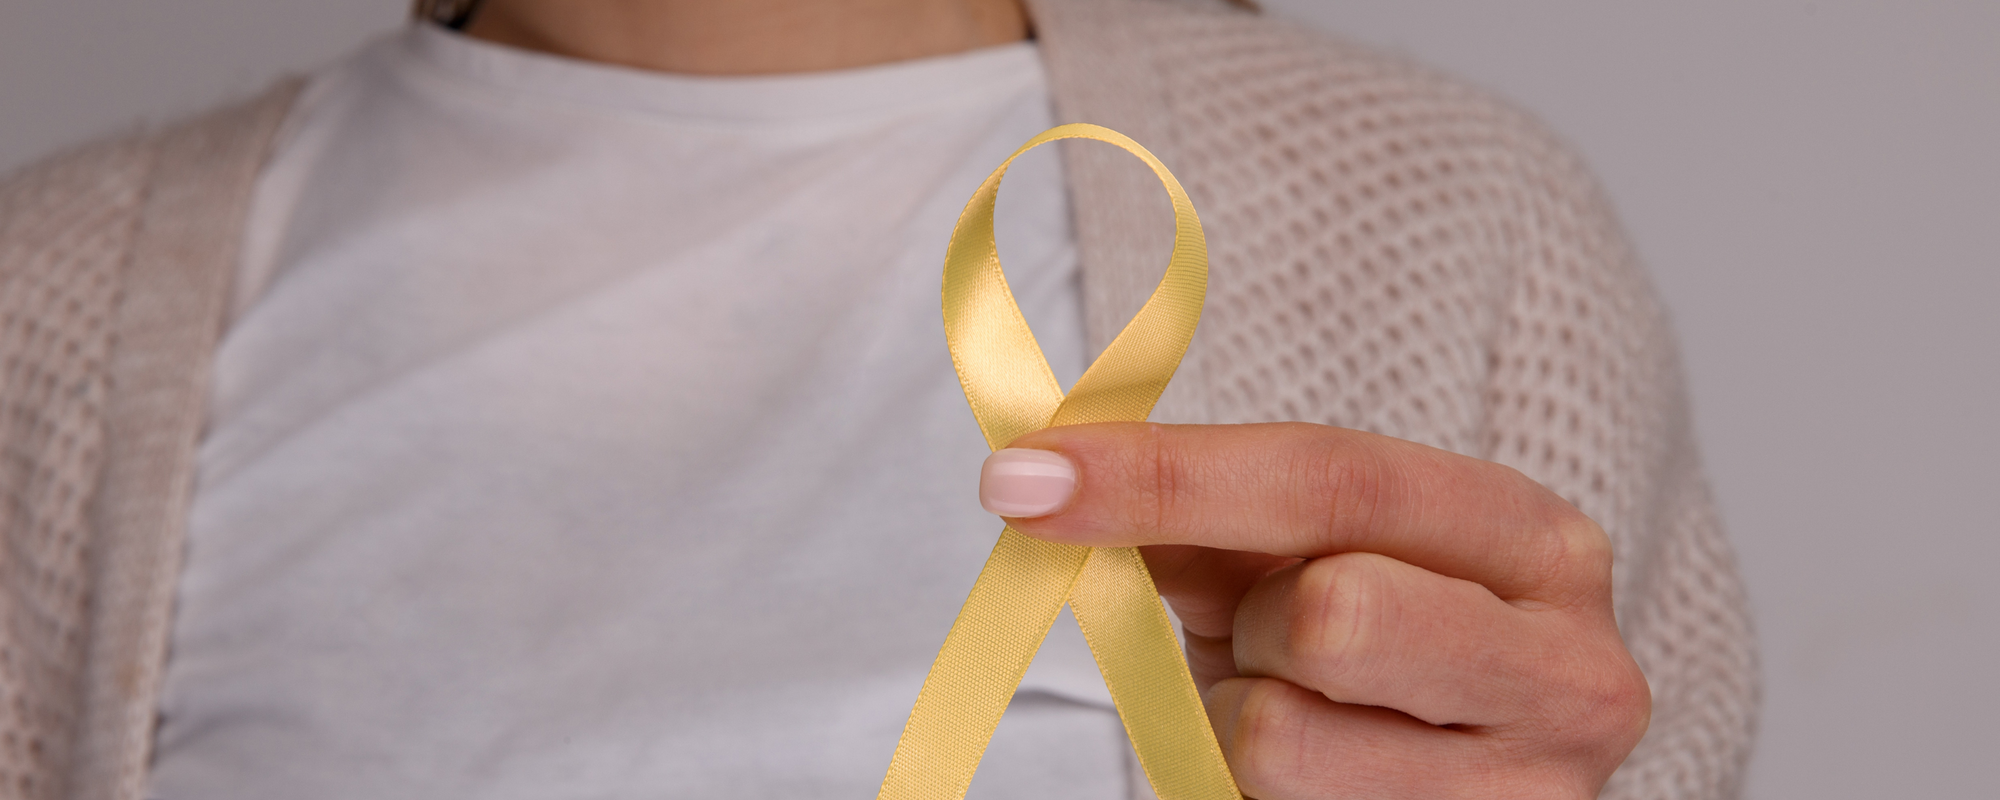 5 Facts you may not know about Endometriosis